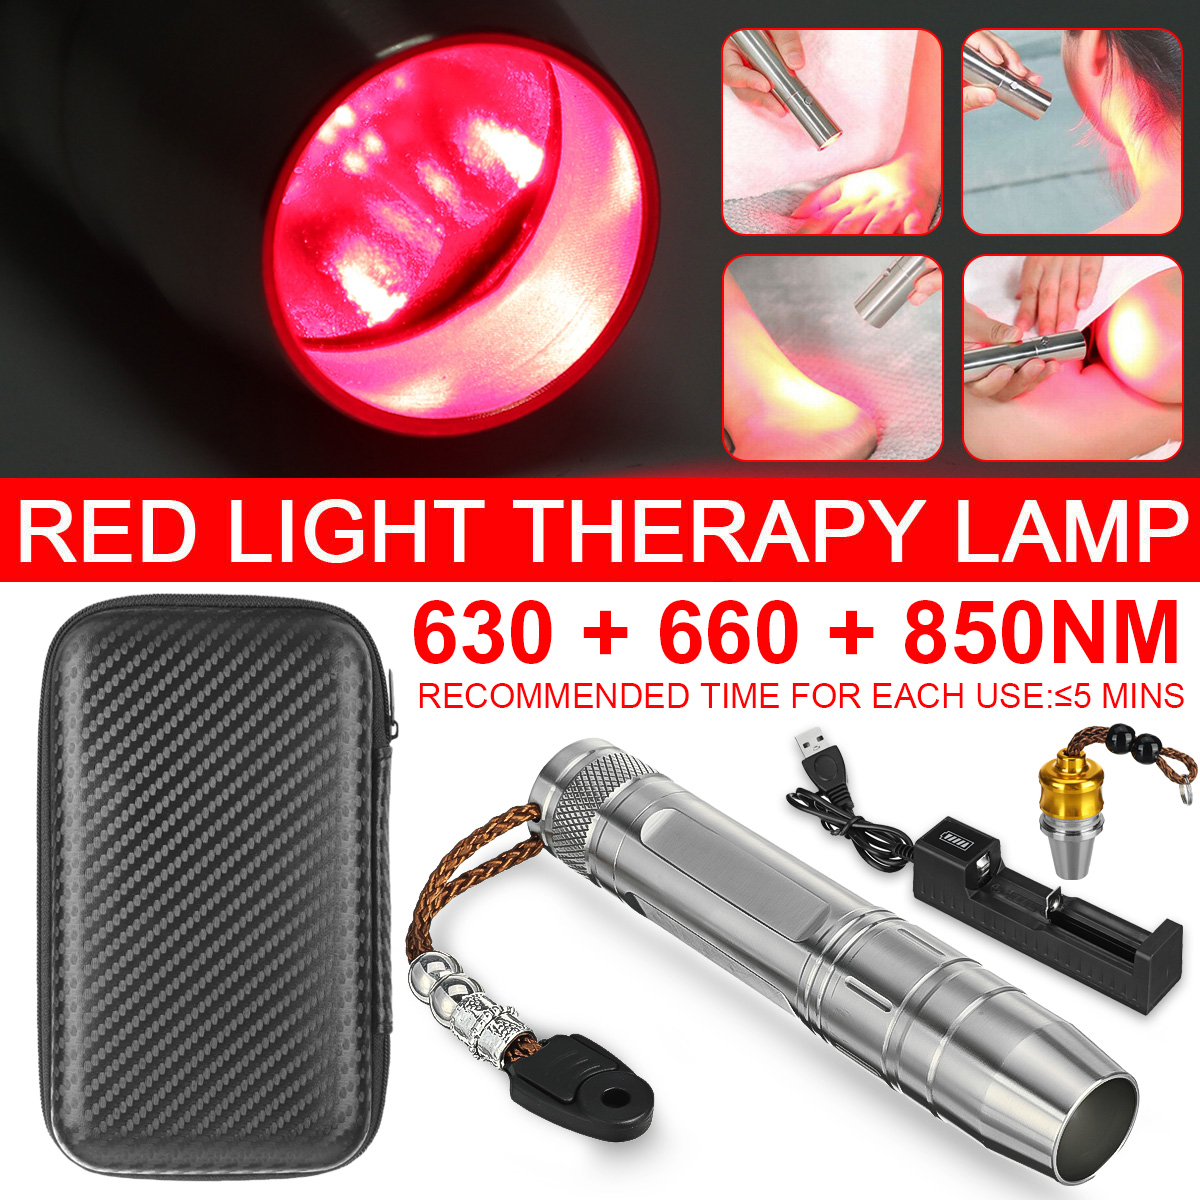 Portable-Home-Use-LED-Face-Light-Therapy-630nm-660nm-Red-Light-Combined-With-850nm-Infrared-Light-to-1934525-1